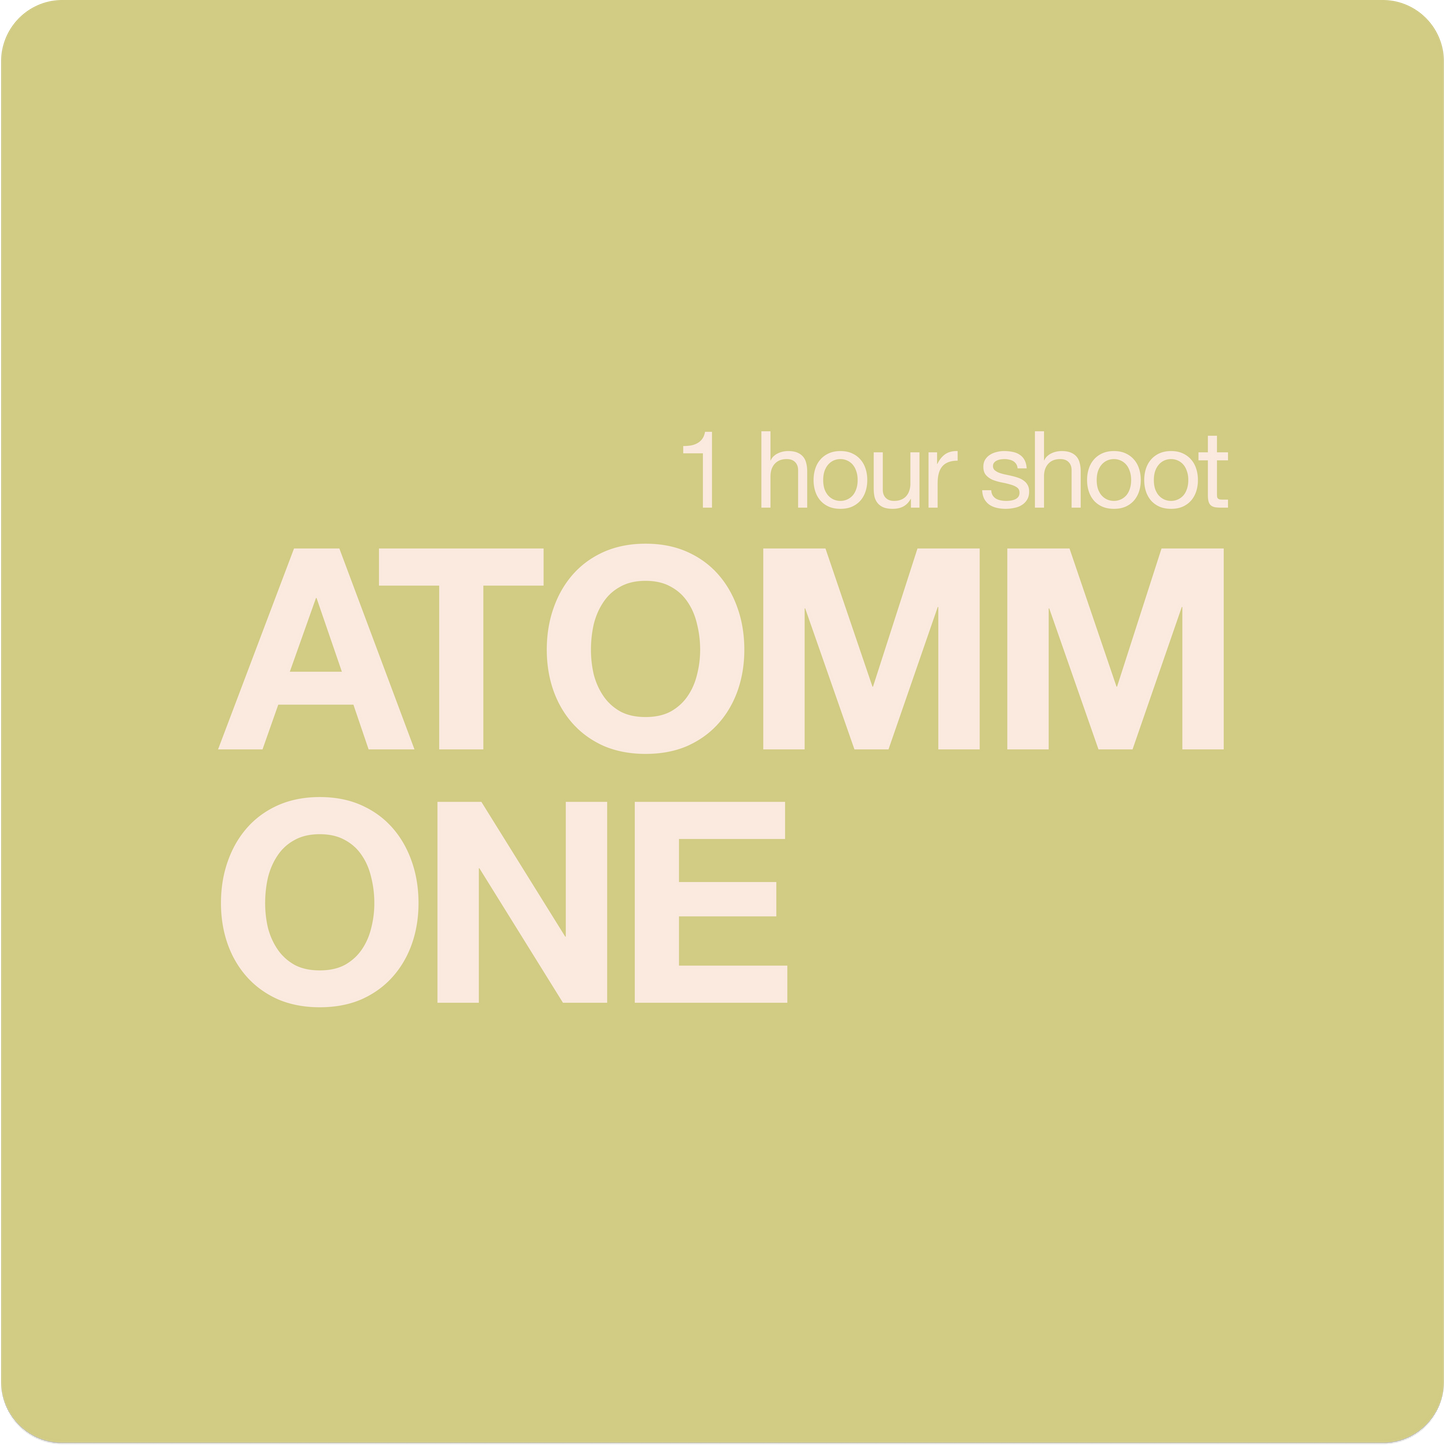 ATOMM ONE (1 hour shoot)